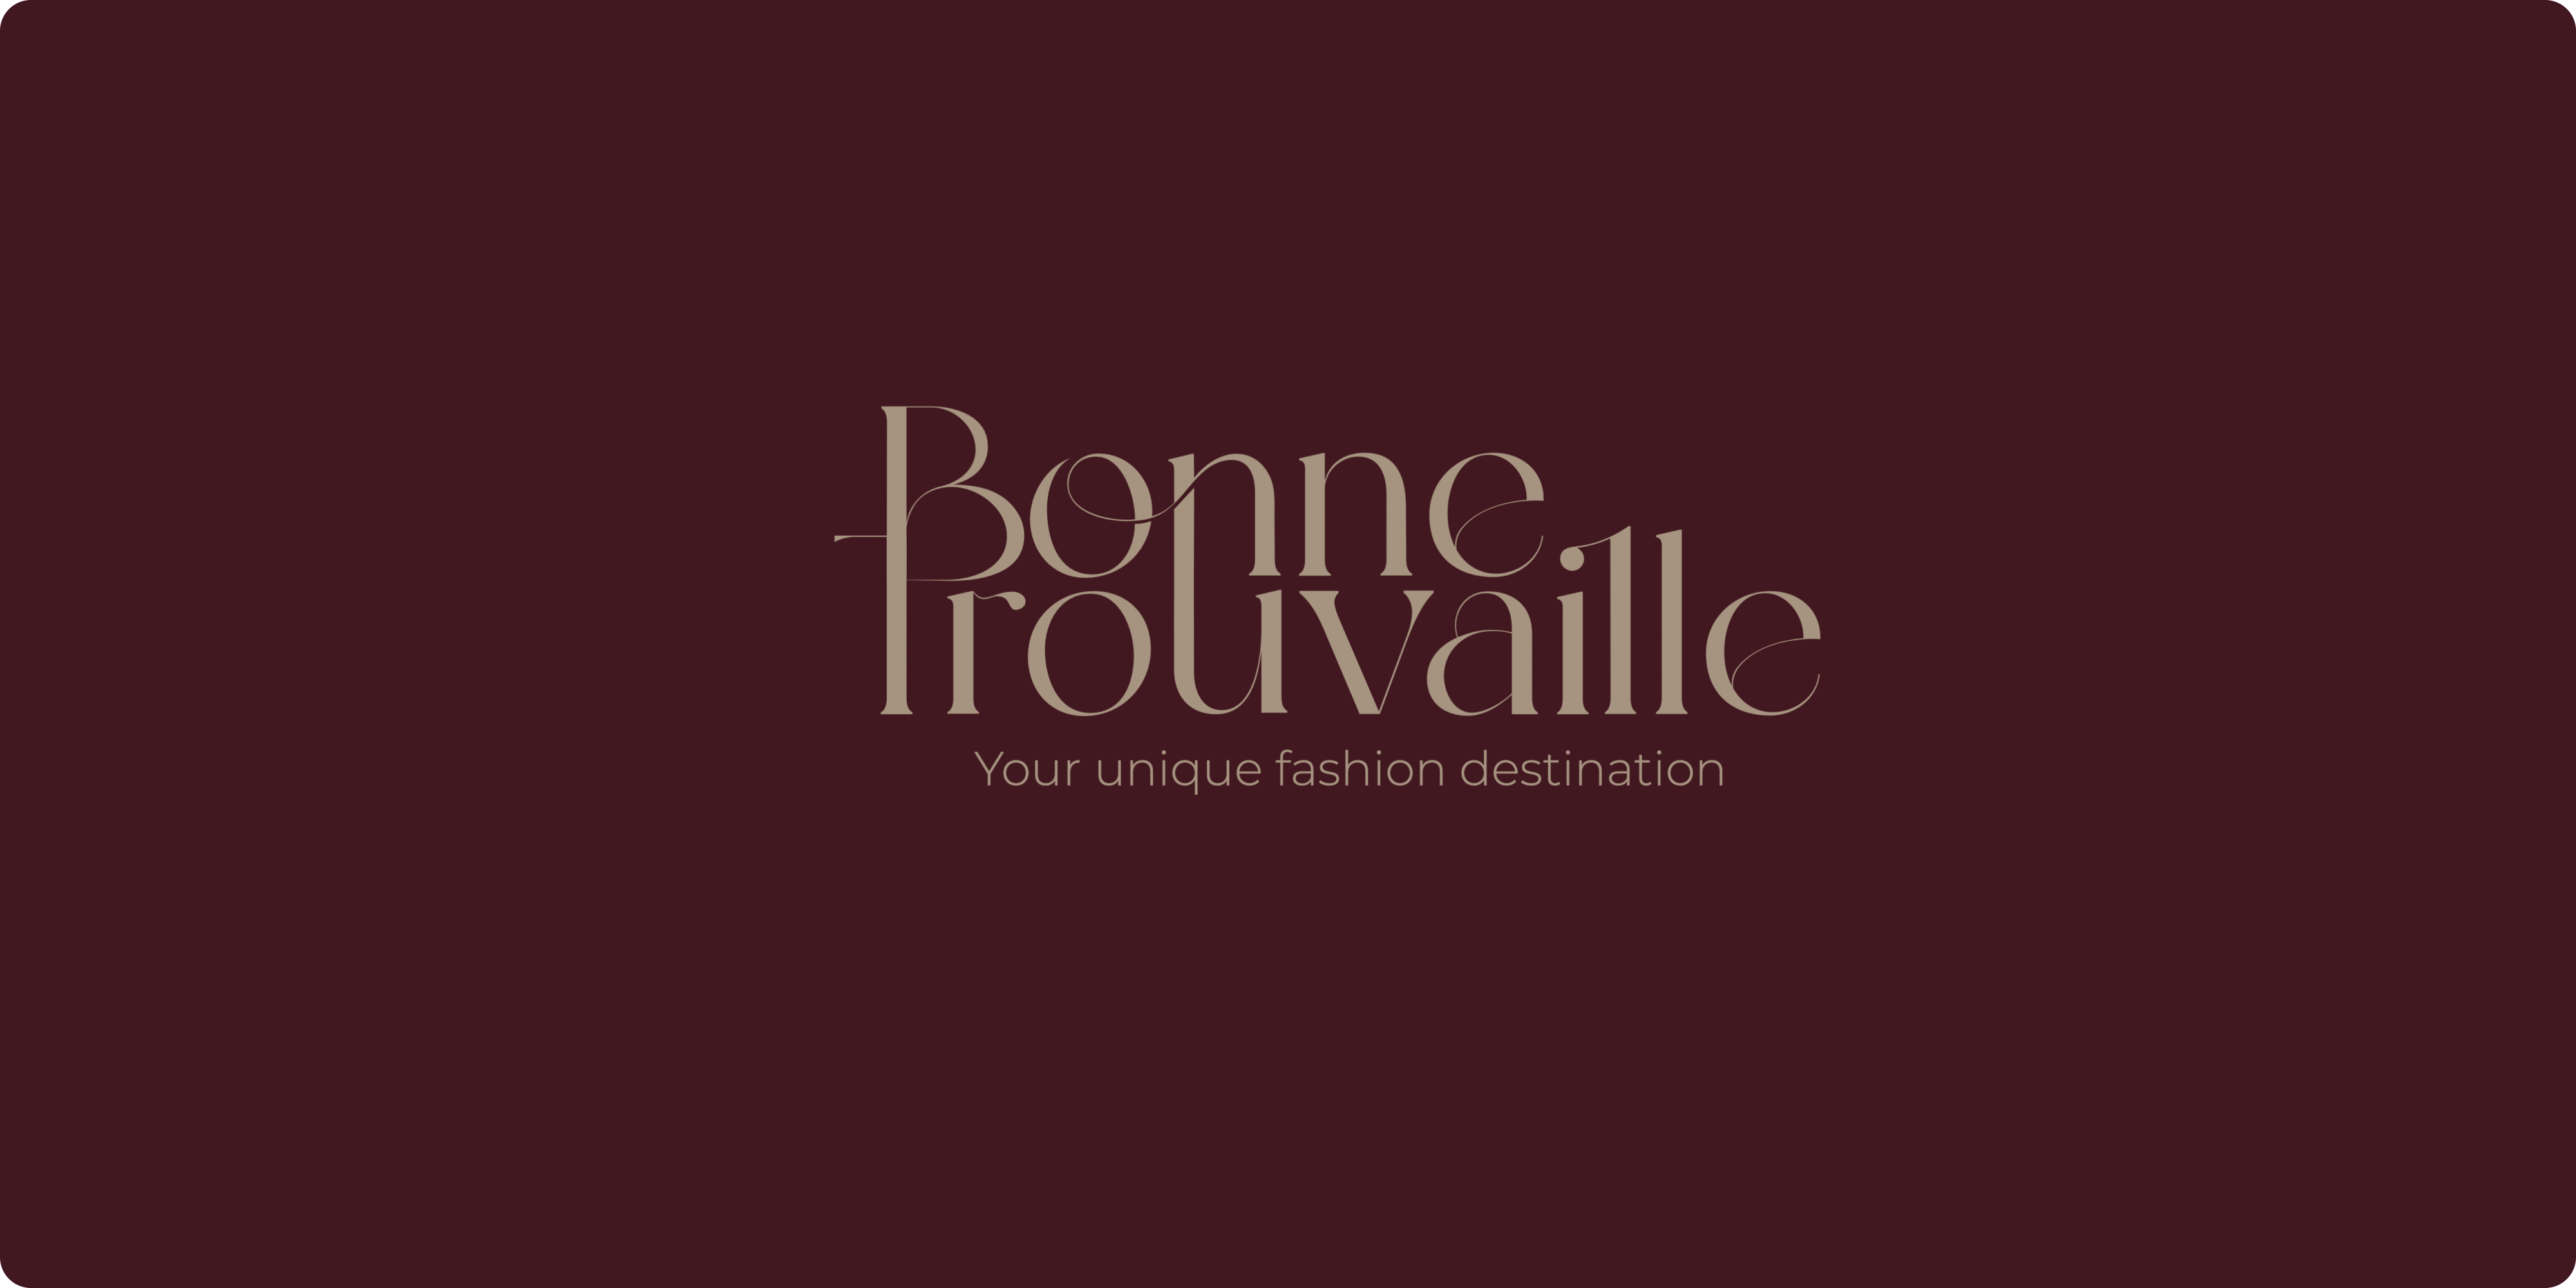 Luxury Women's Fashion Brand: Bonne Trouvaille's Journey with Brand Vision Marketing.